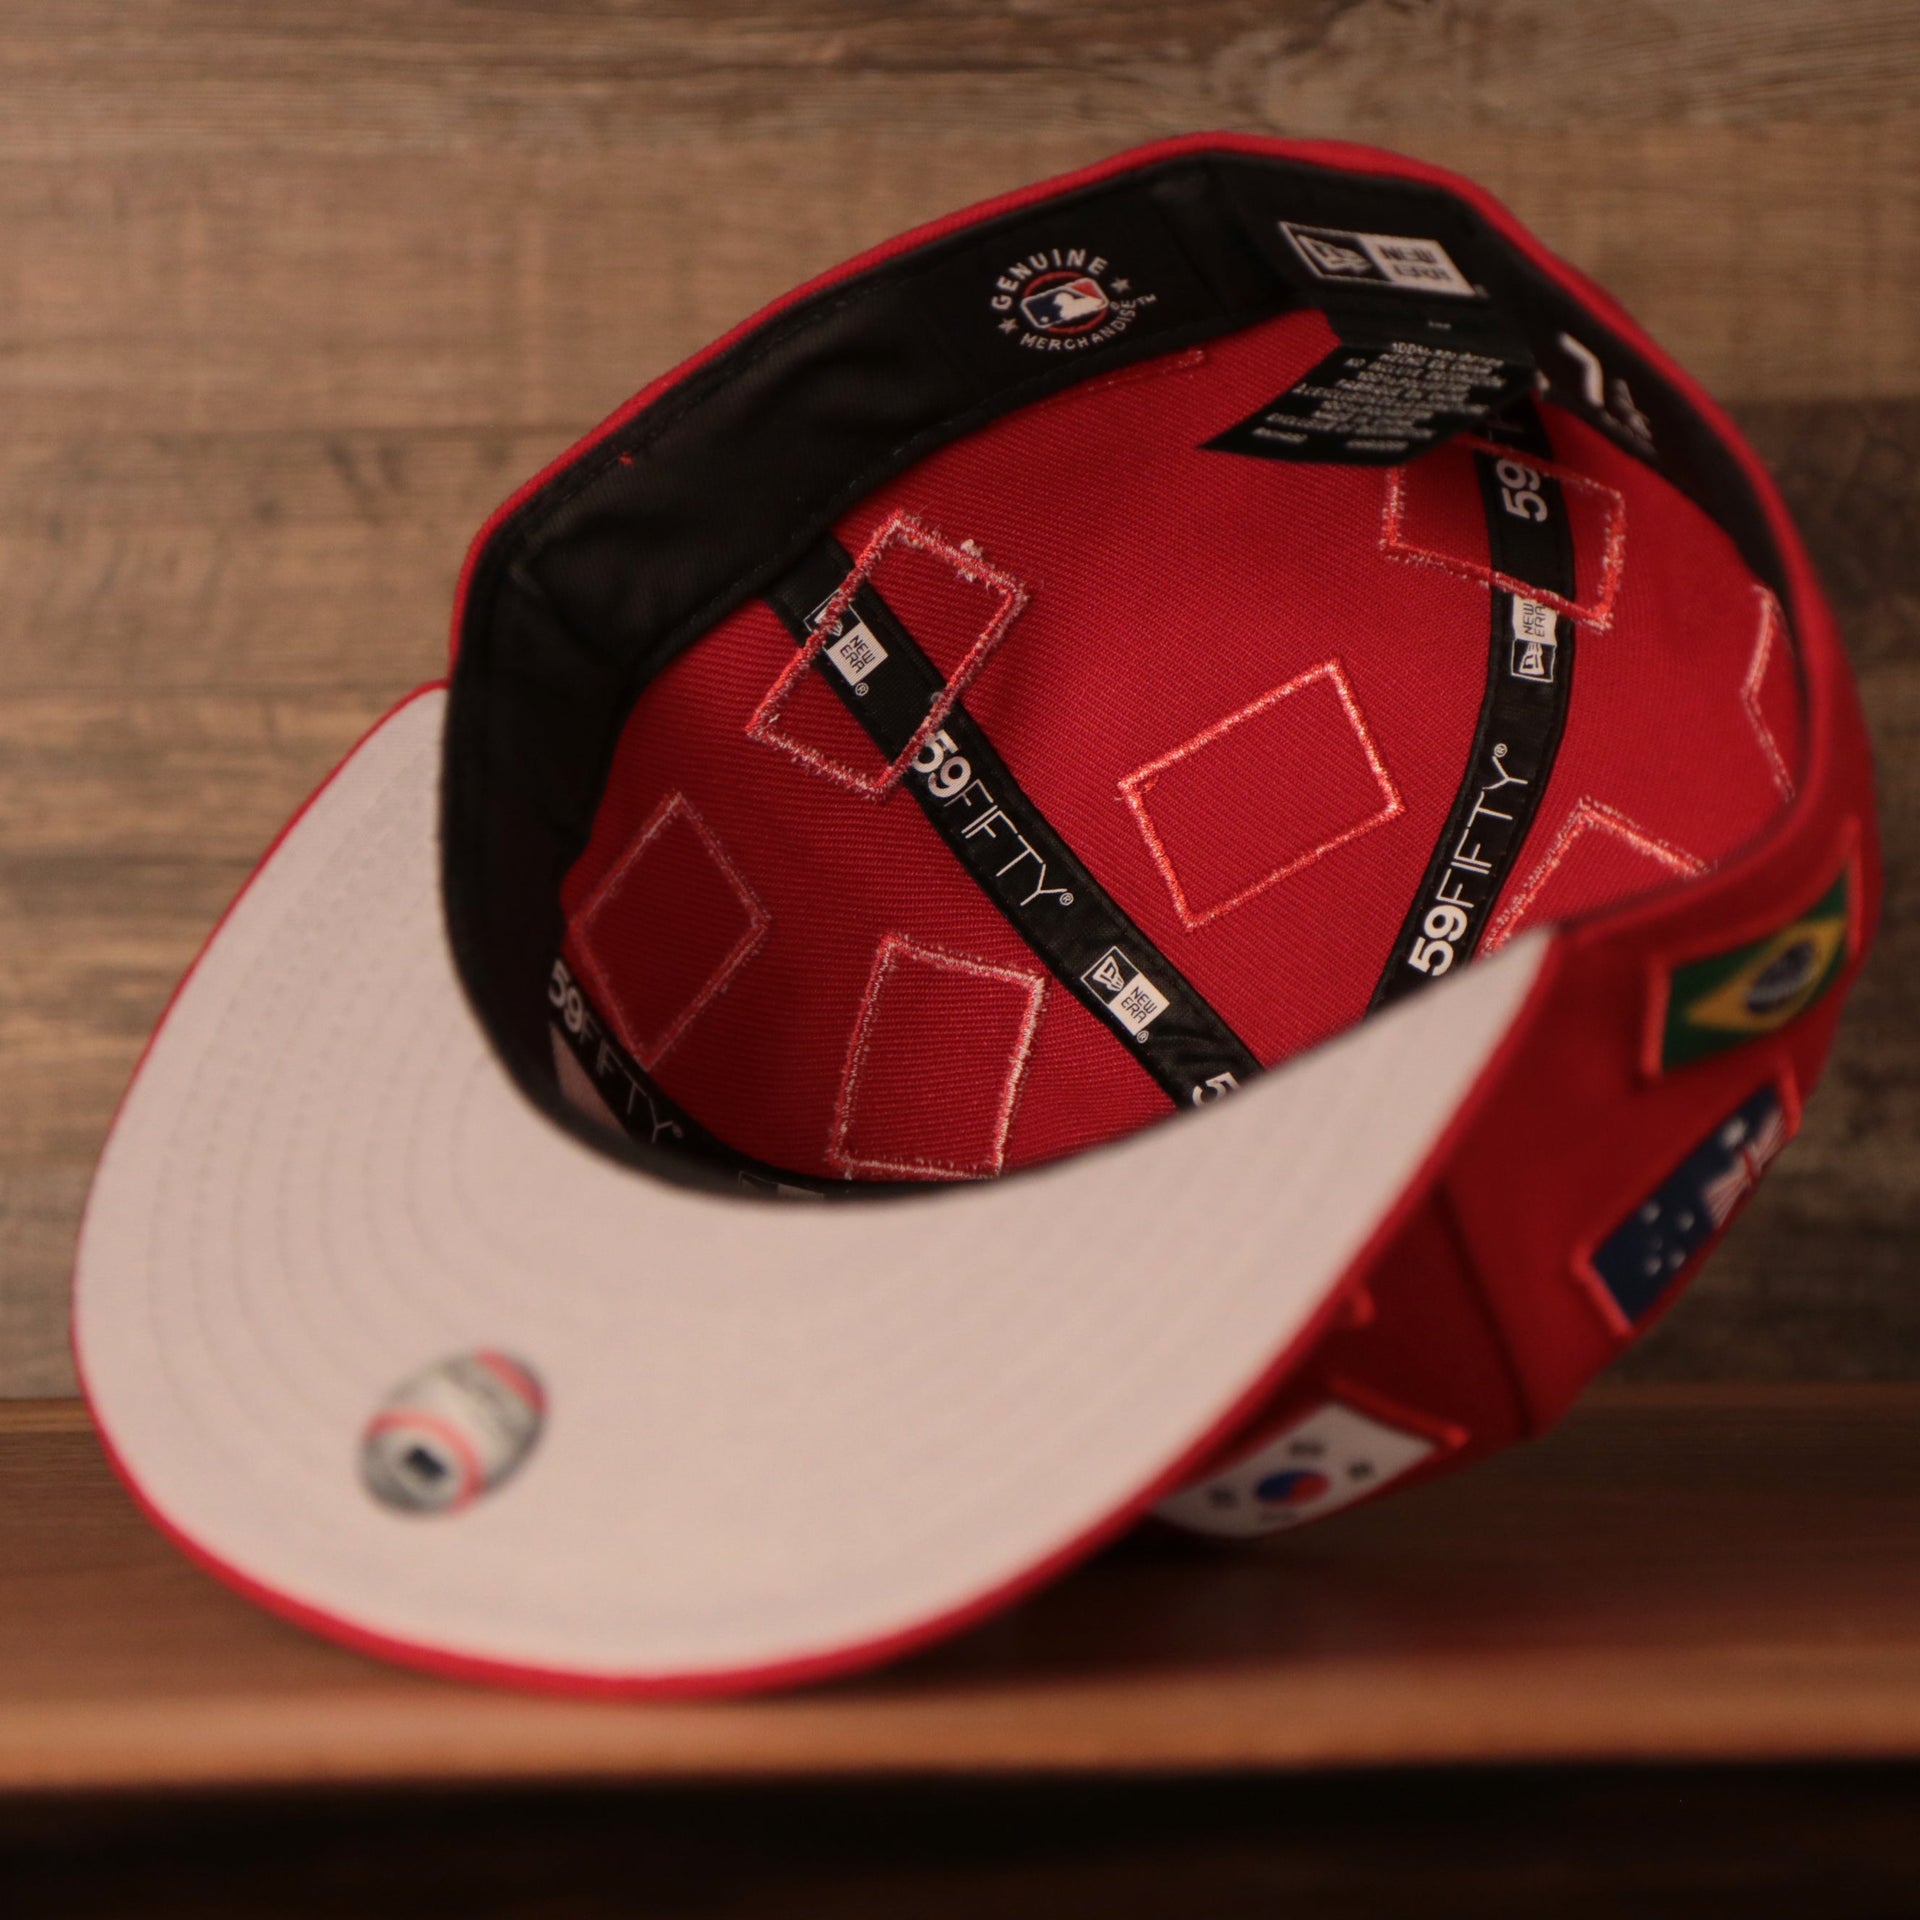 the inside of this phillies world fitted cap has a black sweatband Phillies World Flags Gray Bottom Fitted Cap | Philadelphia Phillies International Flags Red Grey Under Brim Fitted Cap